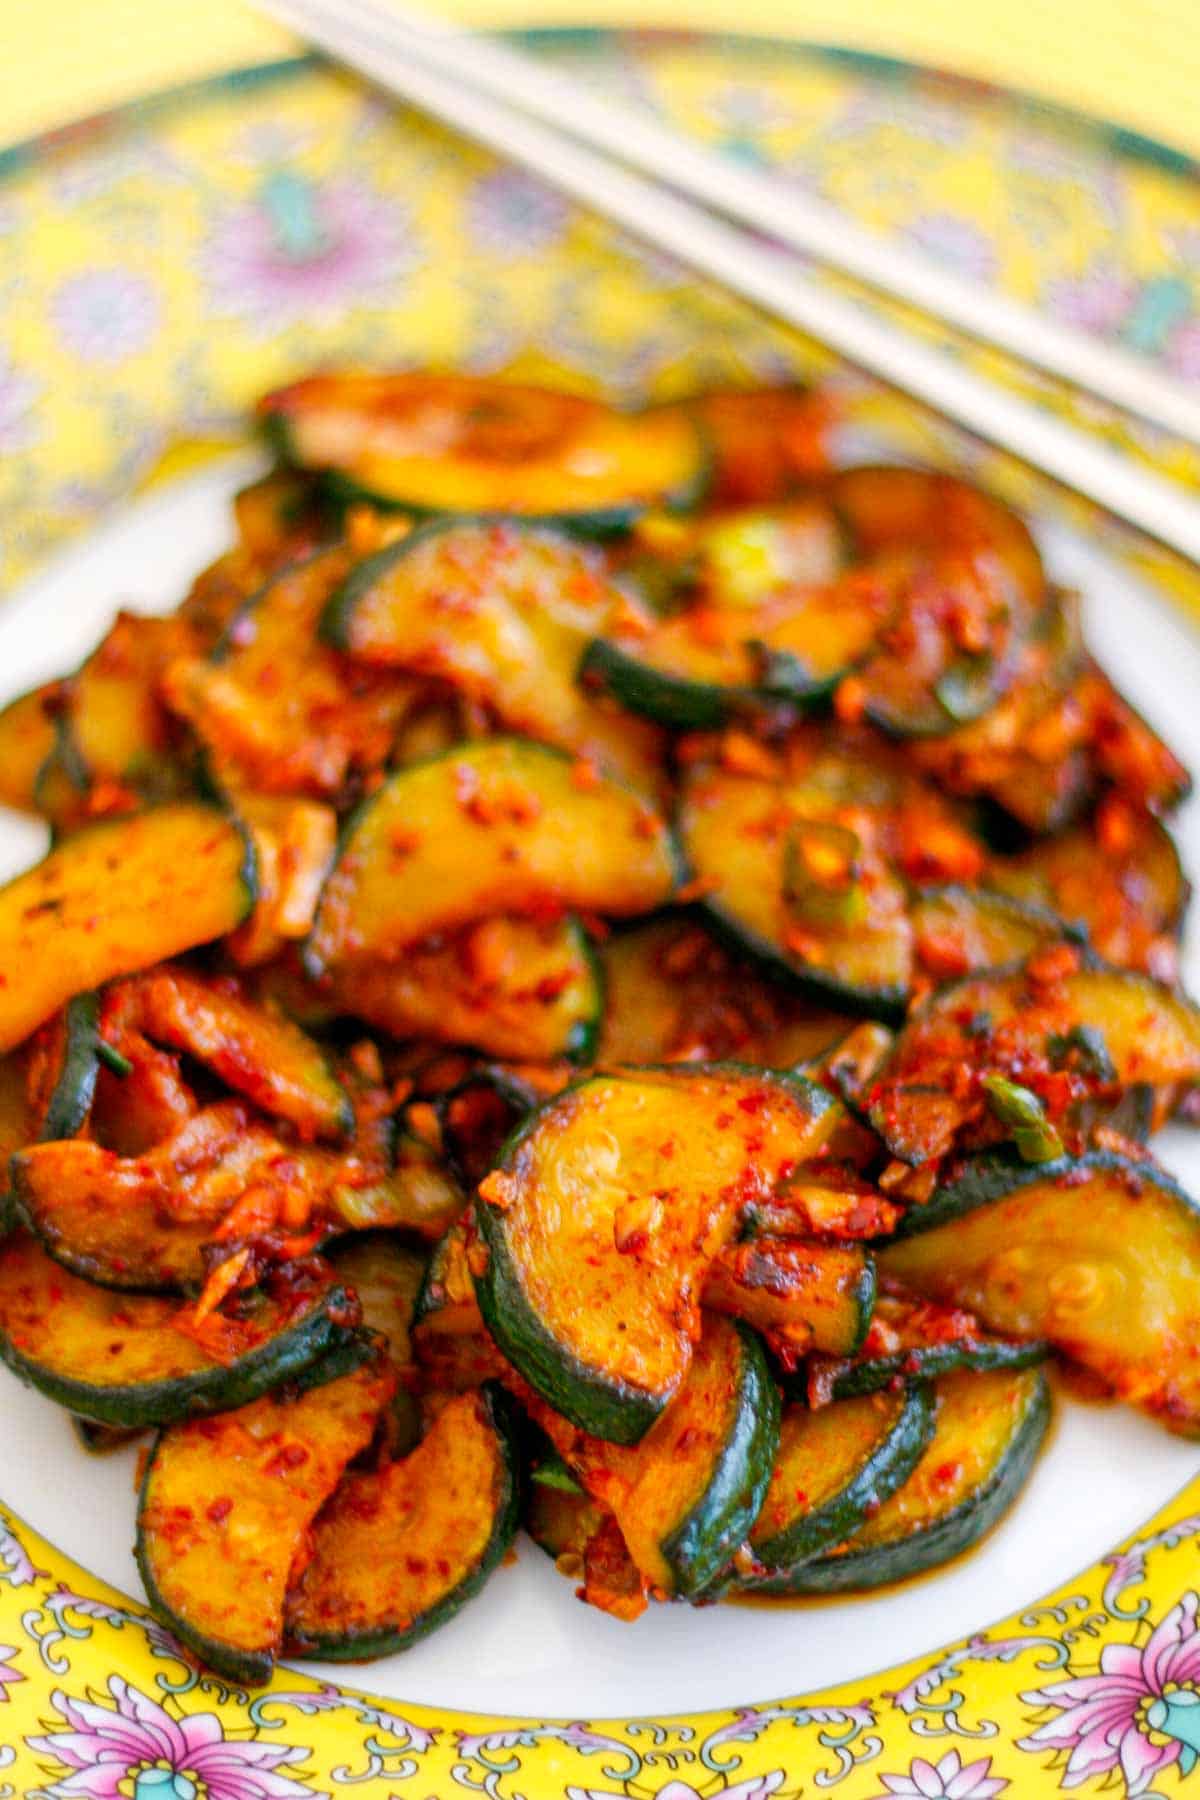 Slices of zucchini stir fried with green onions and Korean red pepper flakes place on a patterned plate with a pair of silver chopsticks resting on the right side of the plate.